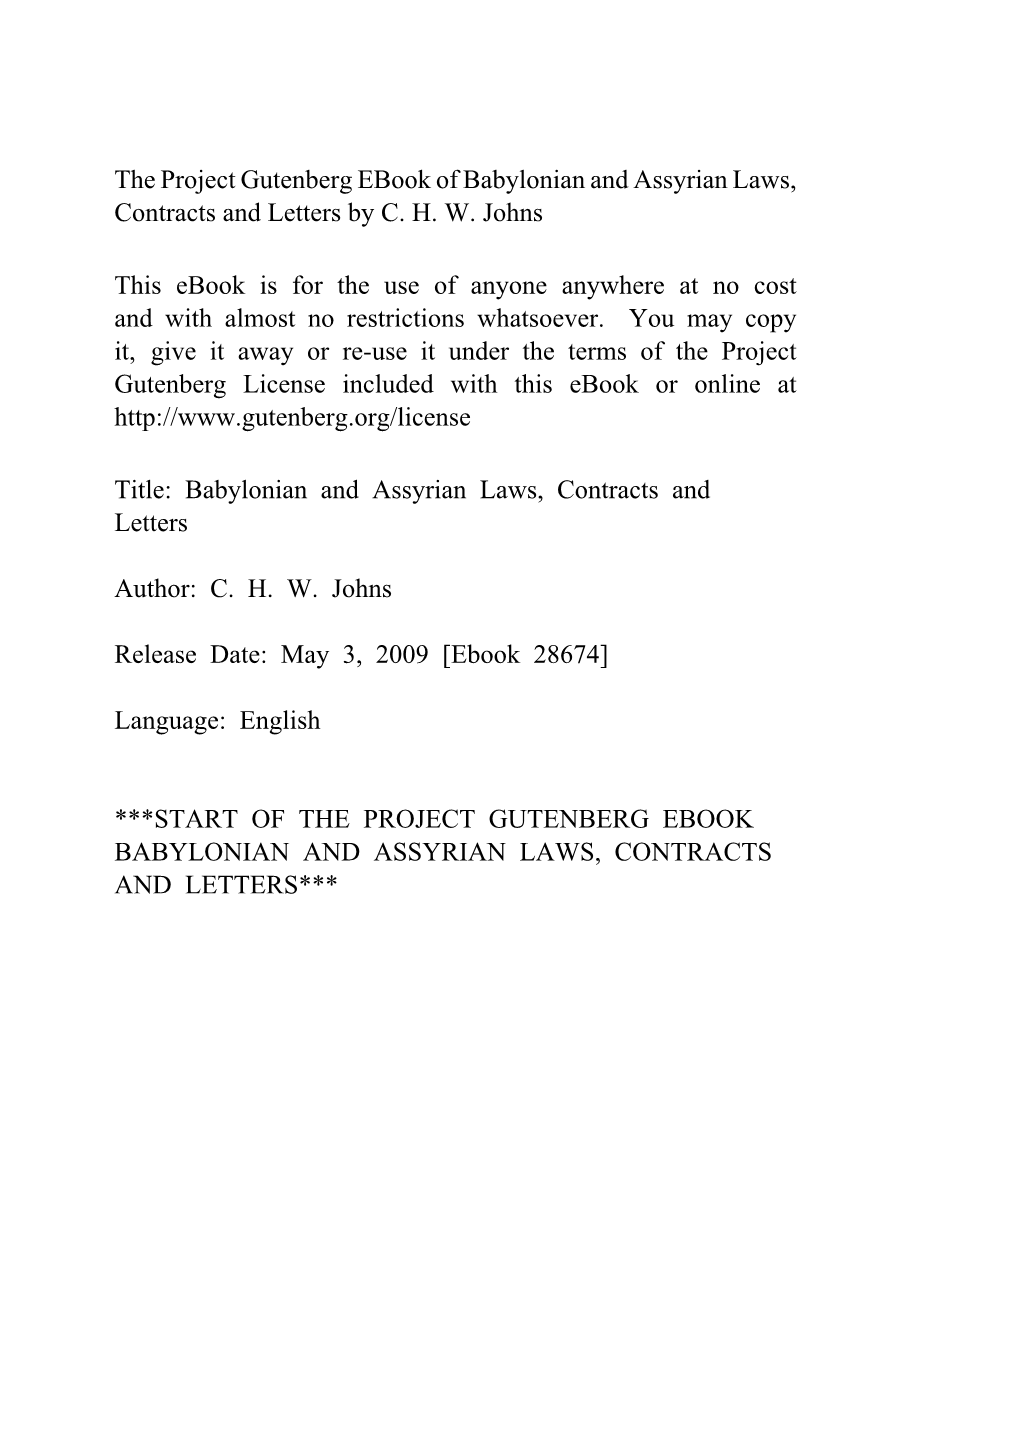 Babylonian and Assyrian Laws, Contracts and Letters by C